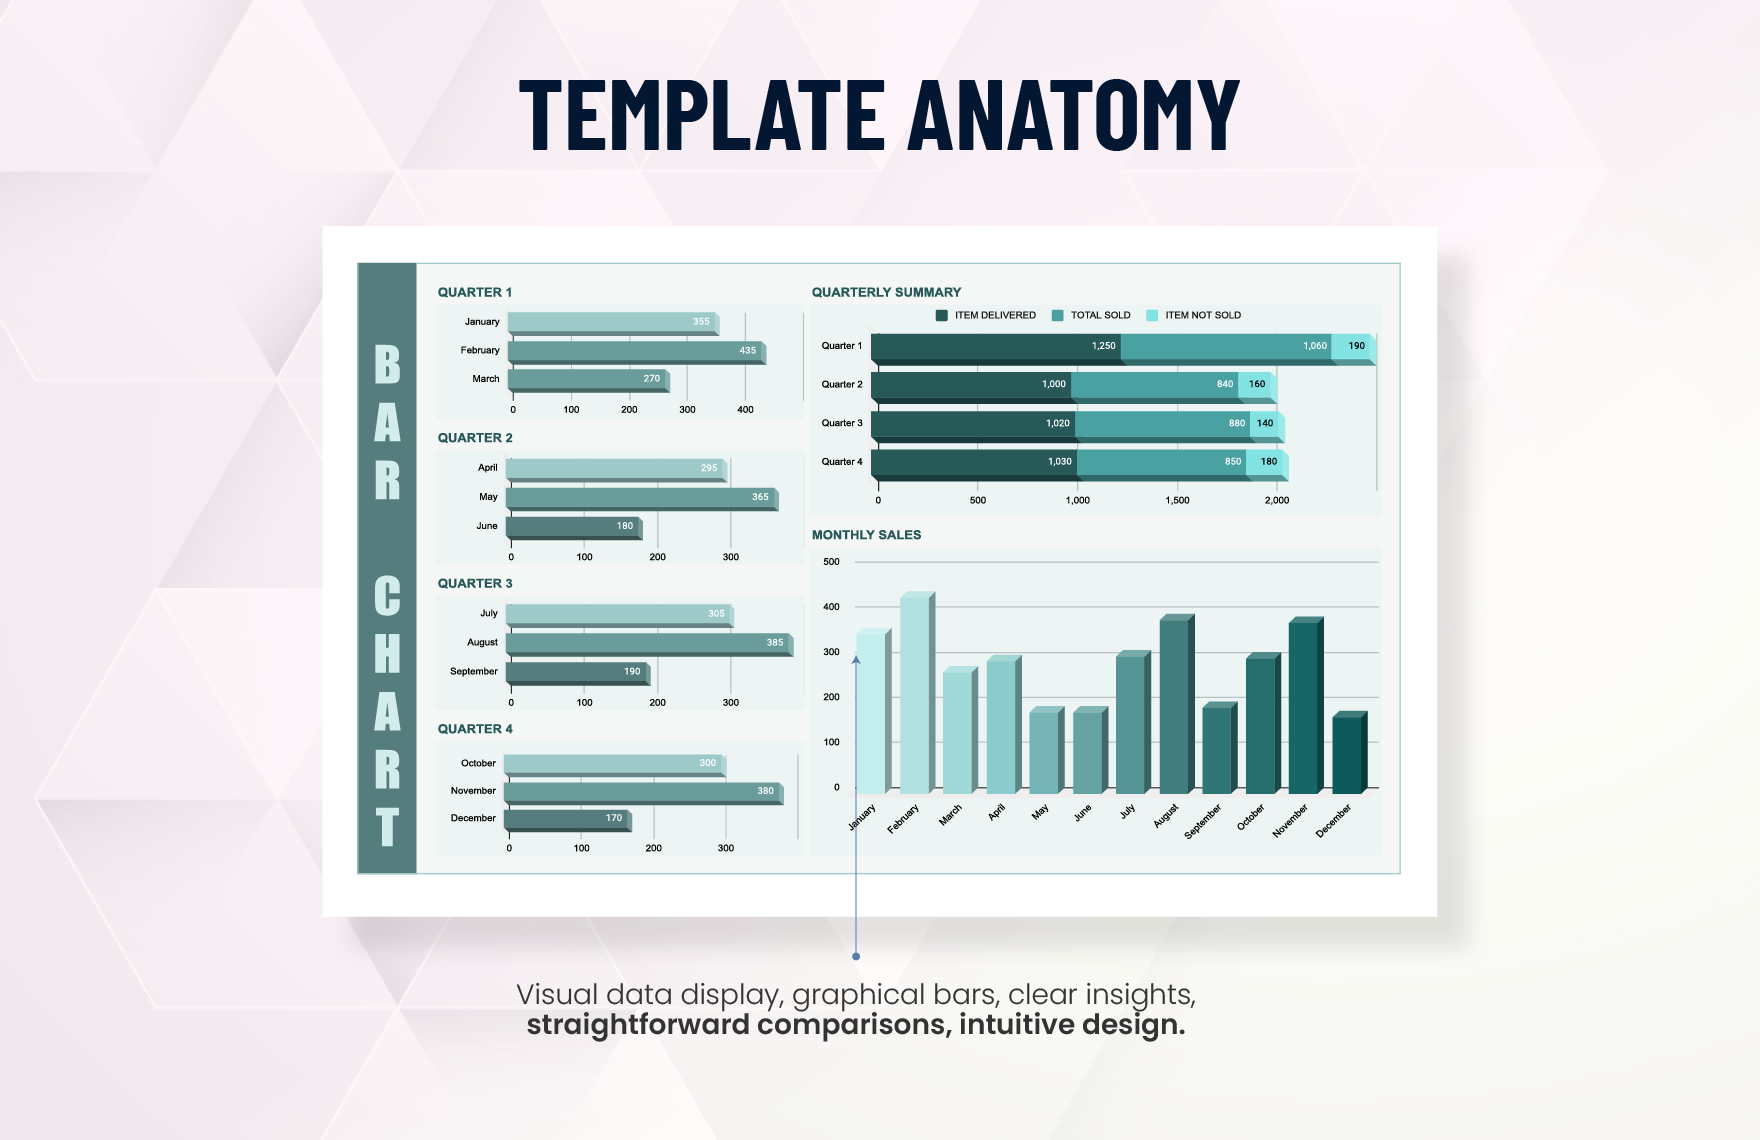 Clustered Bar Chart Template